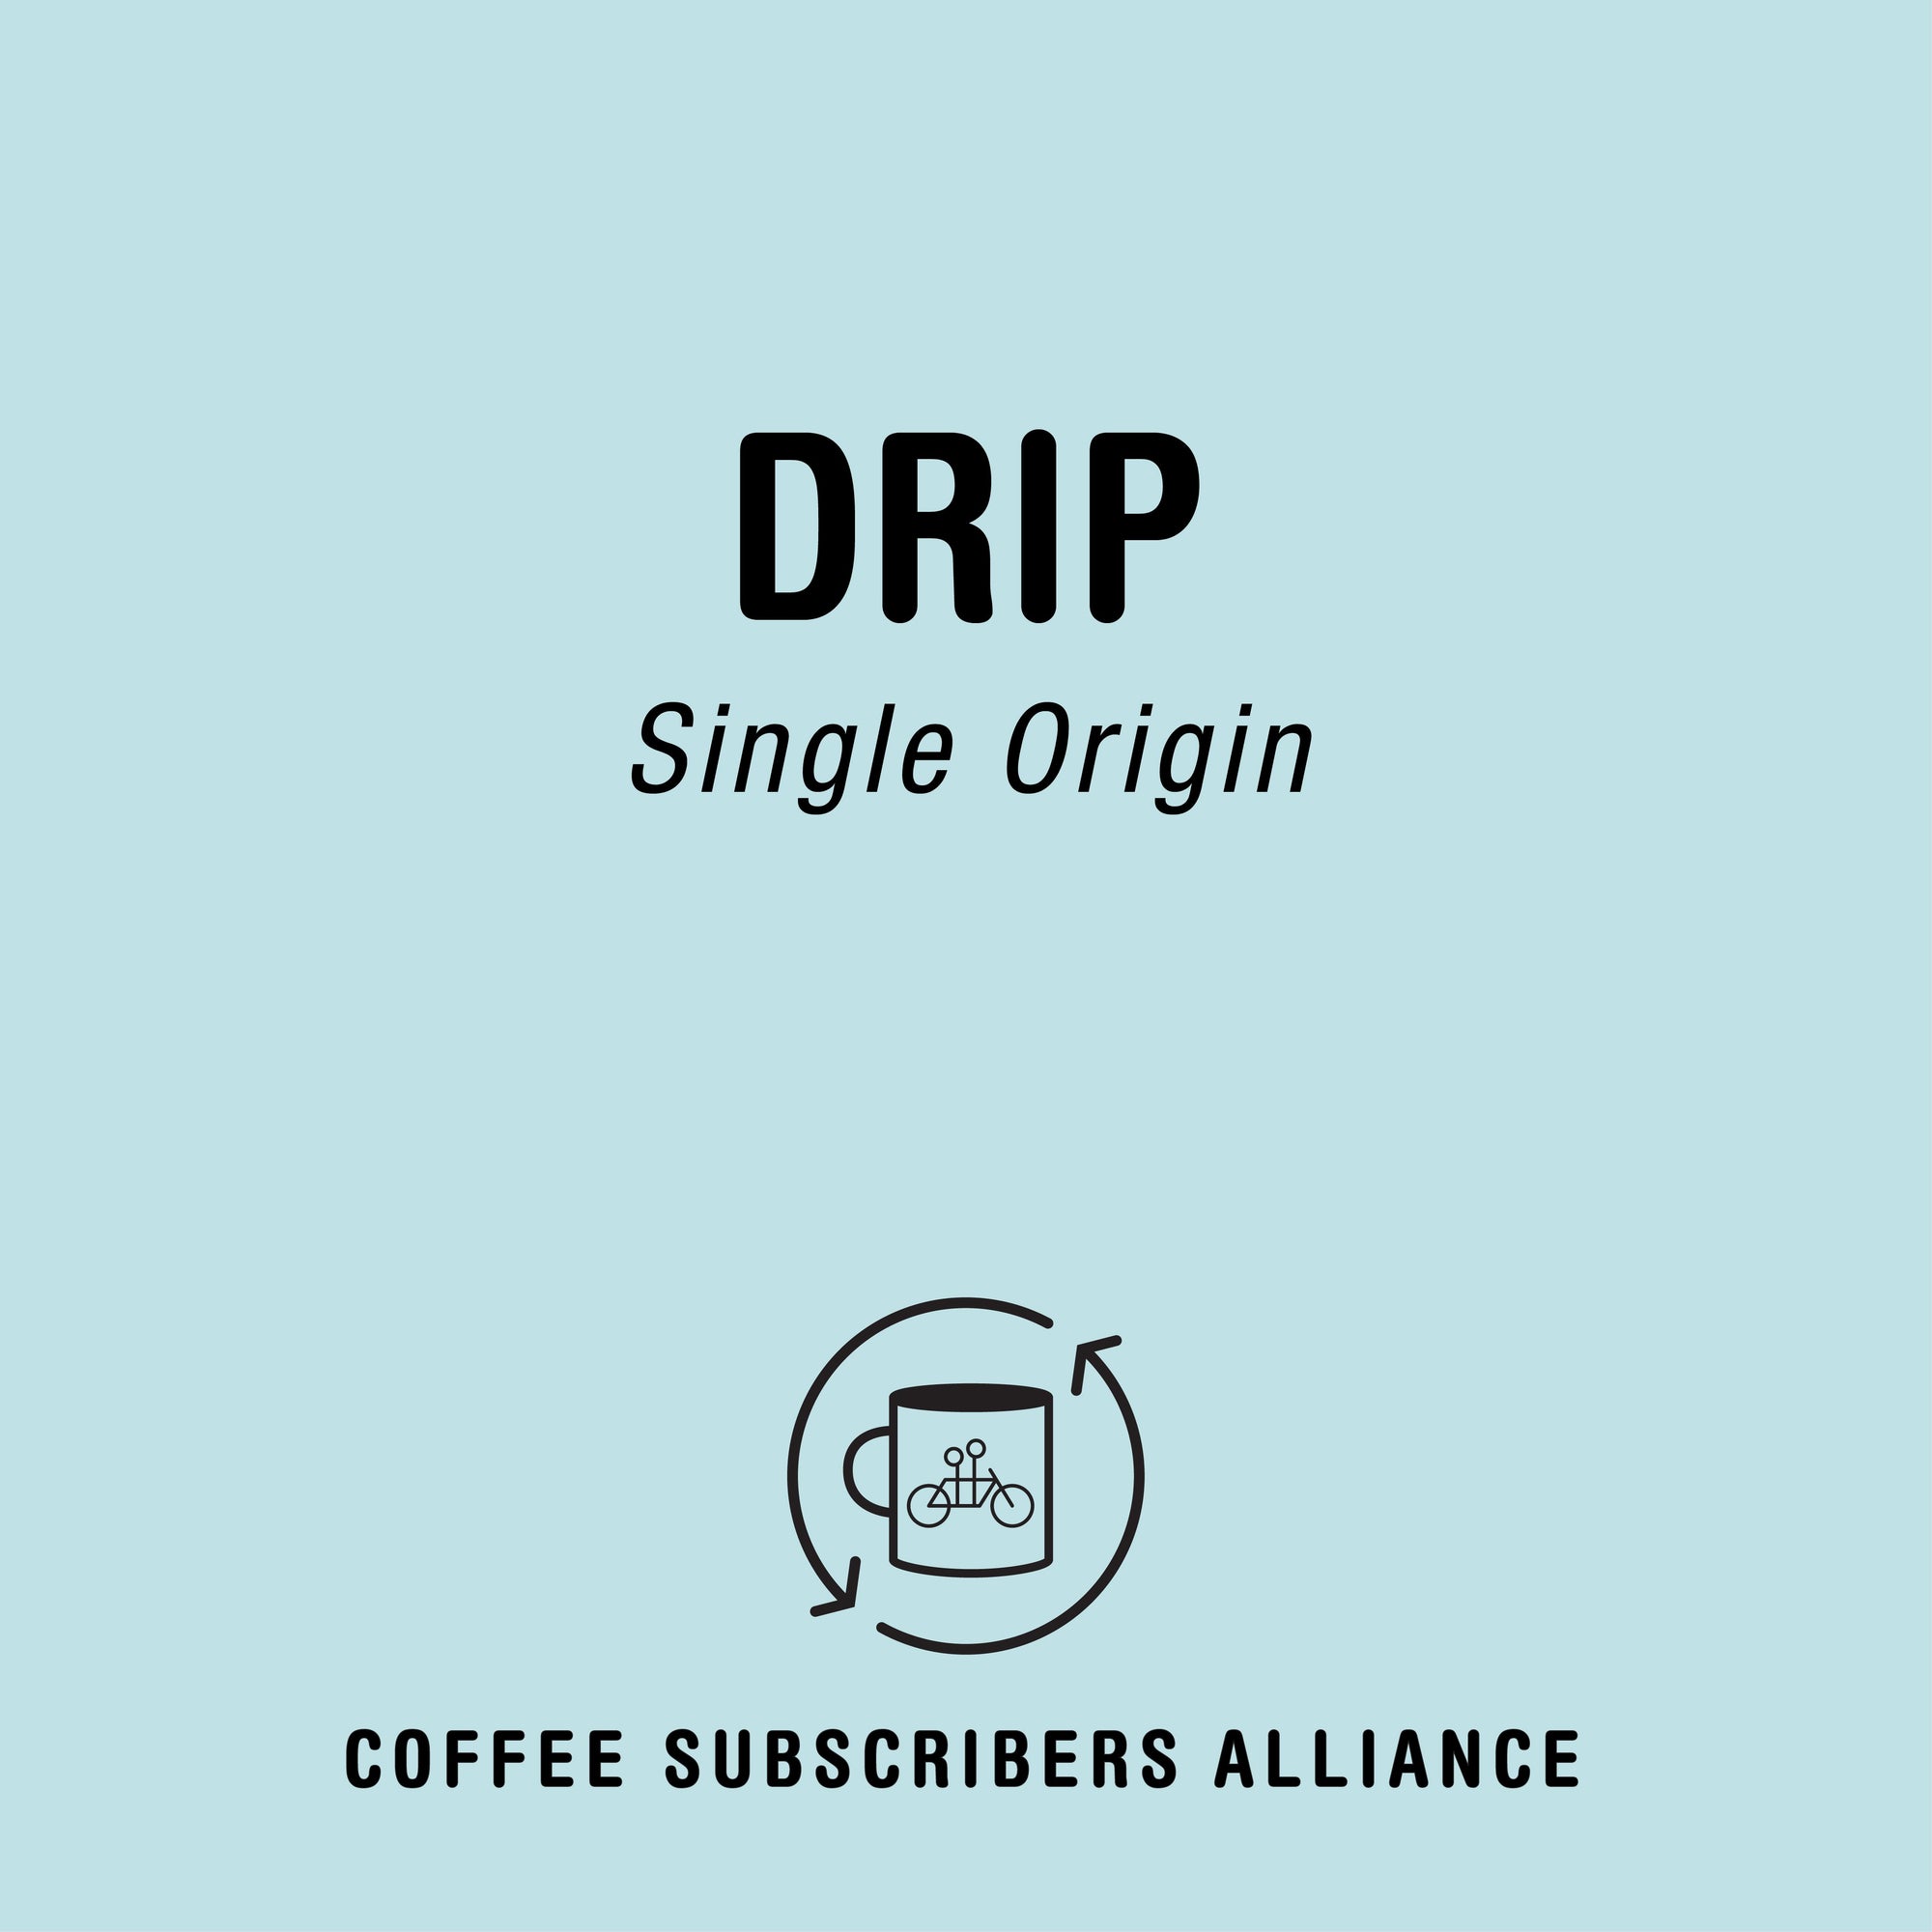 A logo for "Drip Subscription Gift - 2 Weeks x 12" featuring the text "single origin" and a simplistic icon of a coffee cup with coffee beans above it, set against a solid pale blue background, by Tandem.